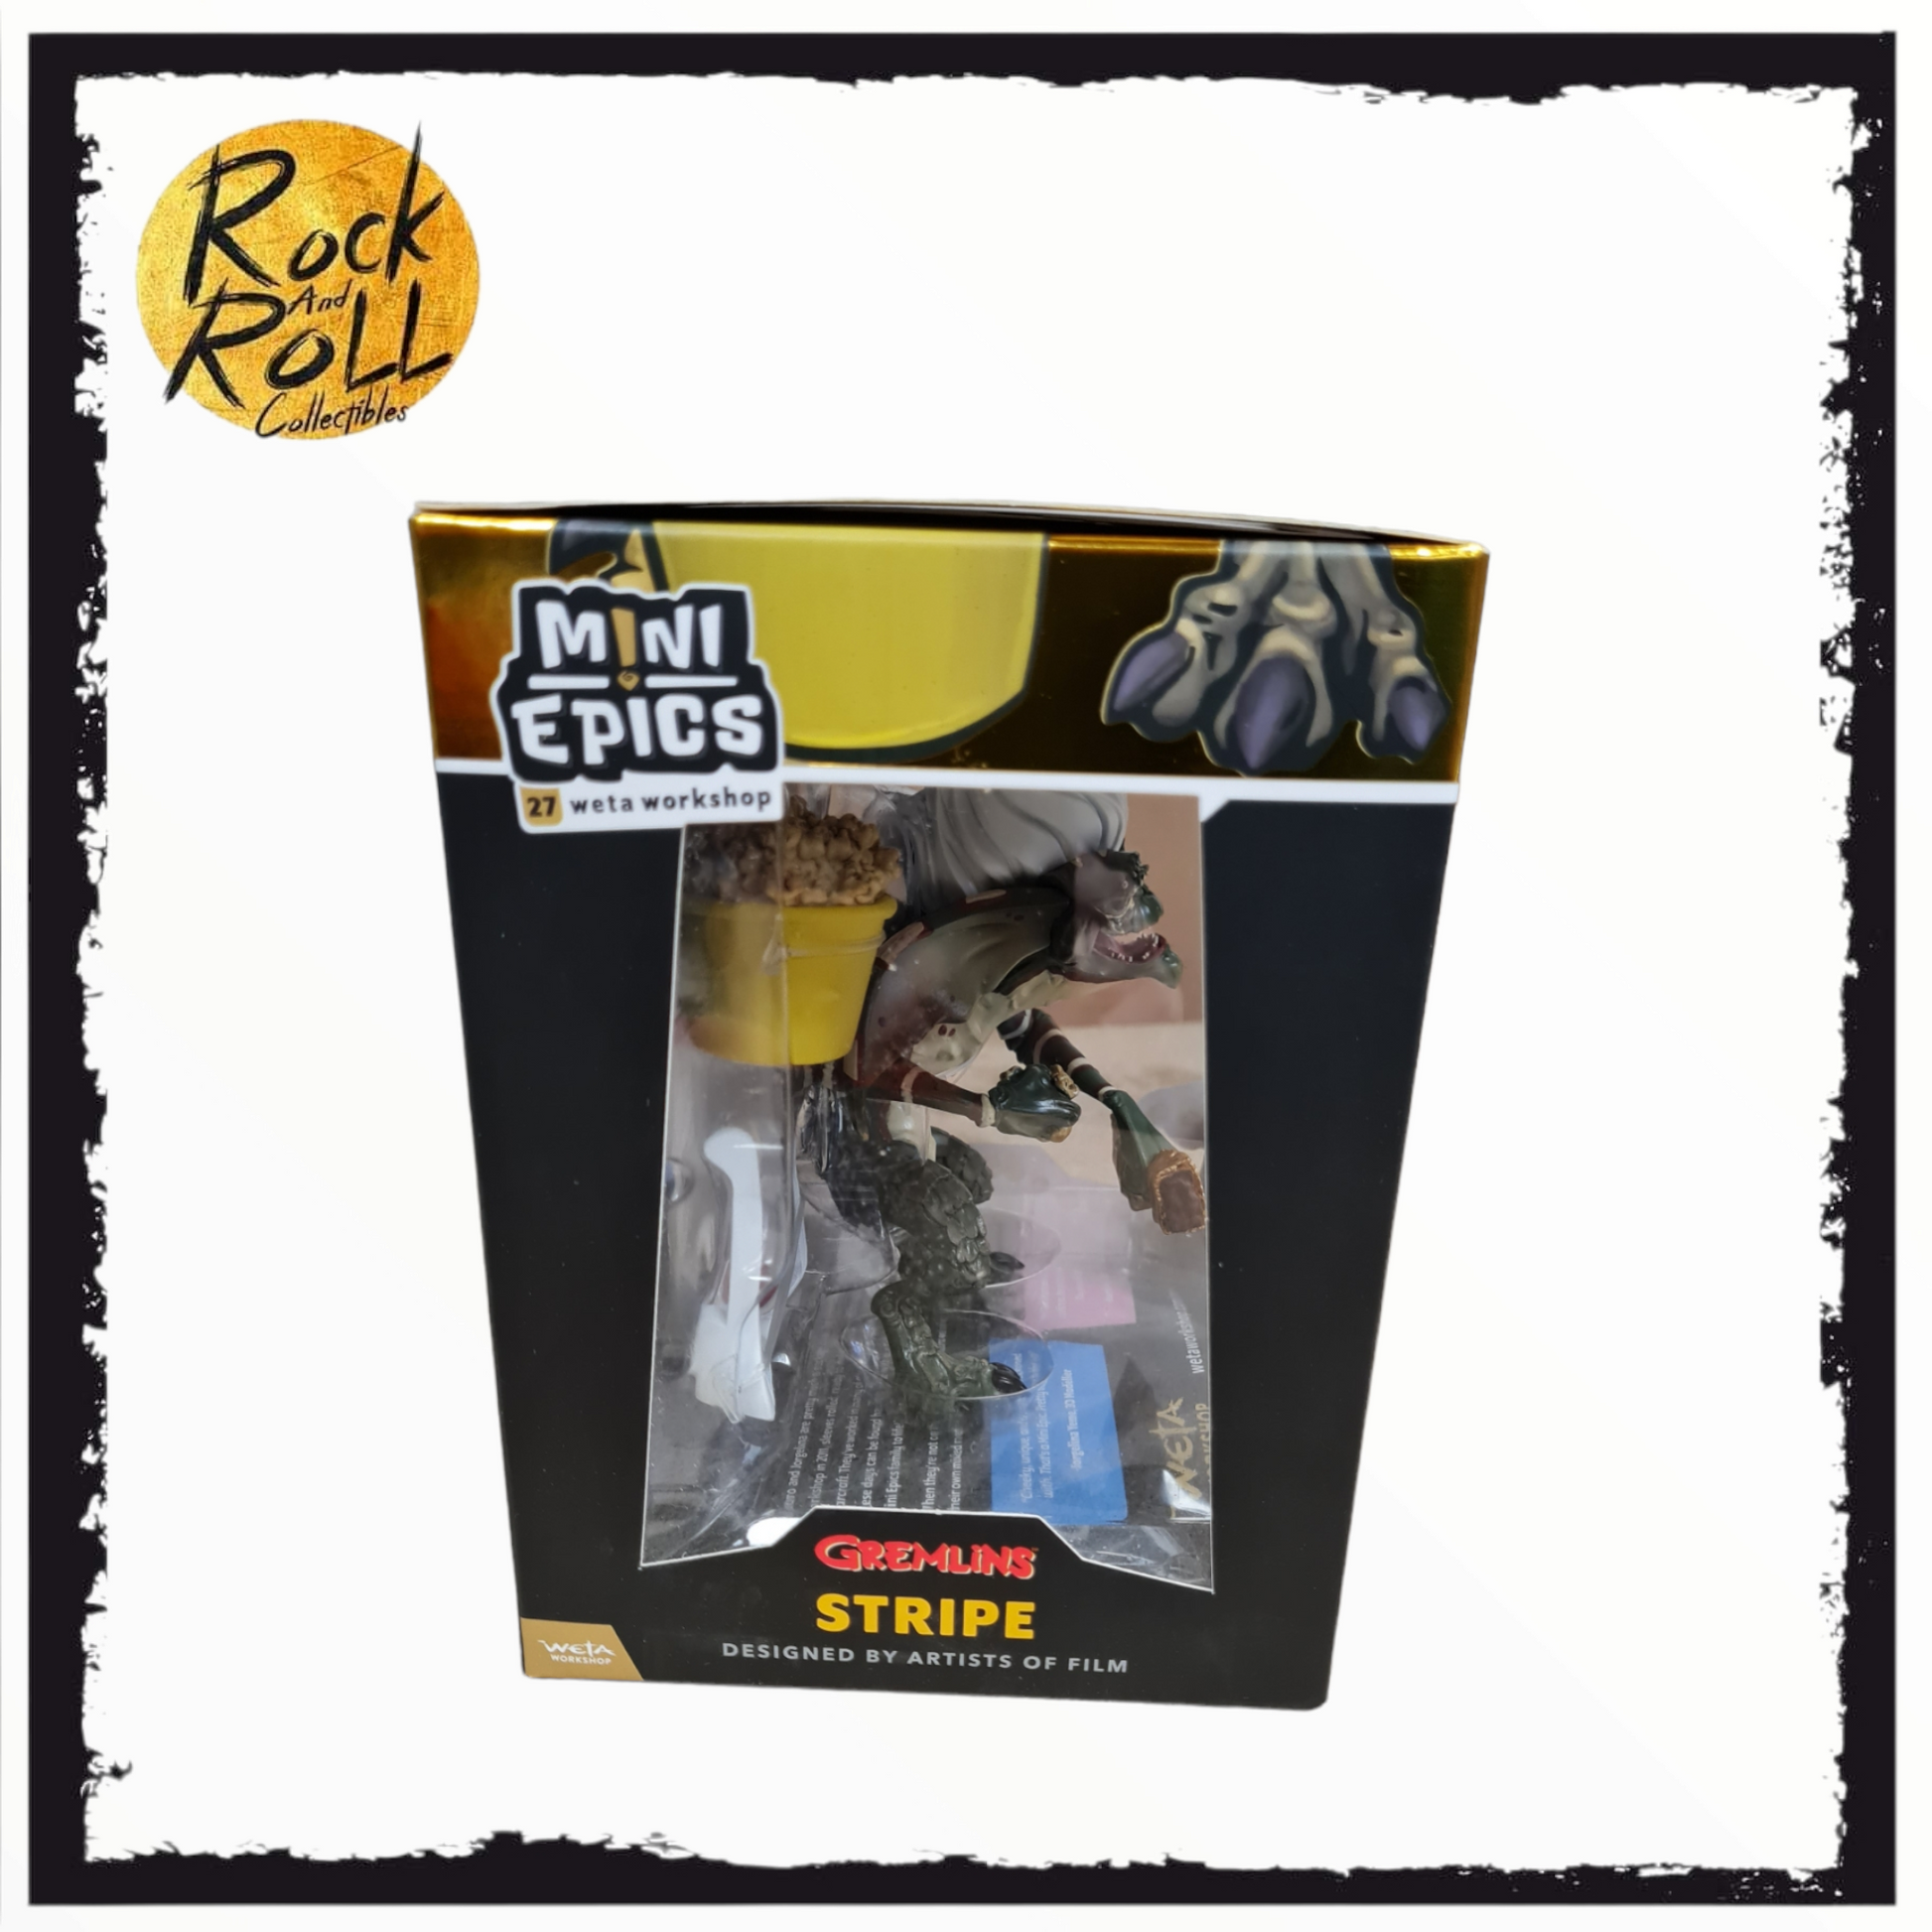 Mini Epics Gremlins Stripe Limited Edition #4 – rock and roll  collectibles